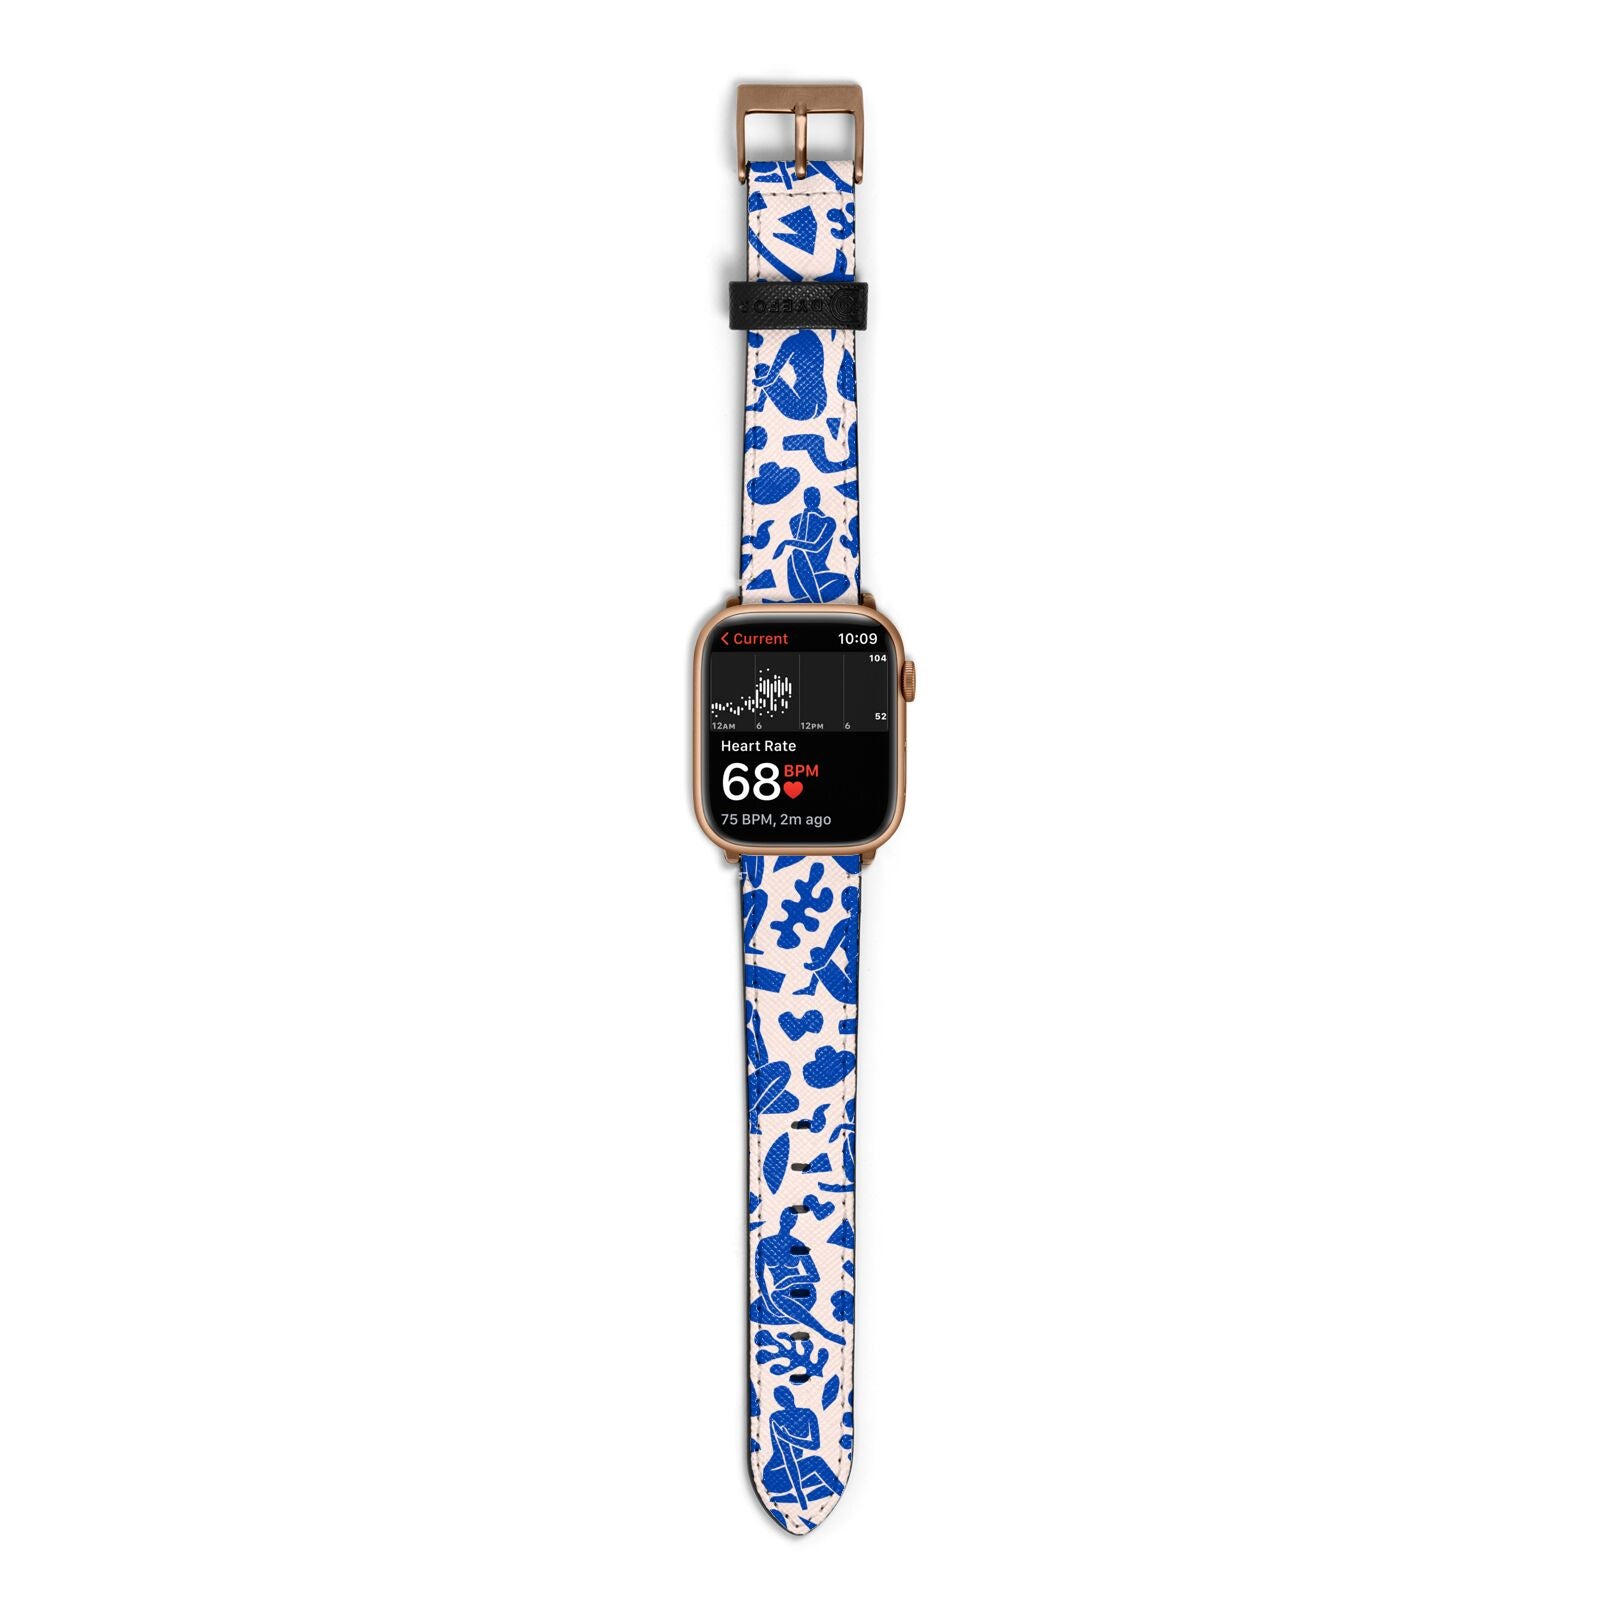 Abstract Art Apple Watch Strap Size 38mm with Gold Hardware